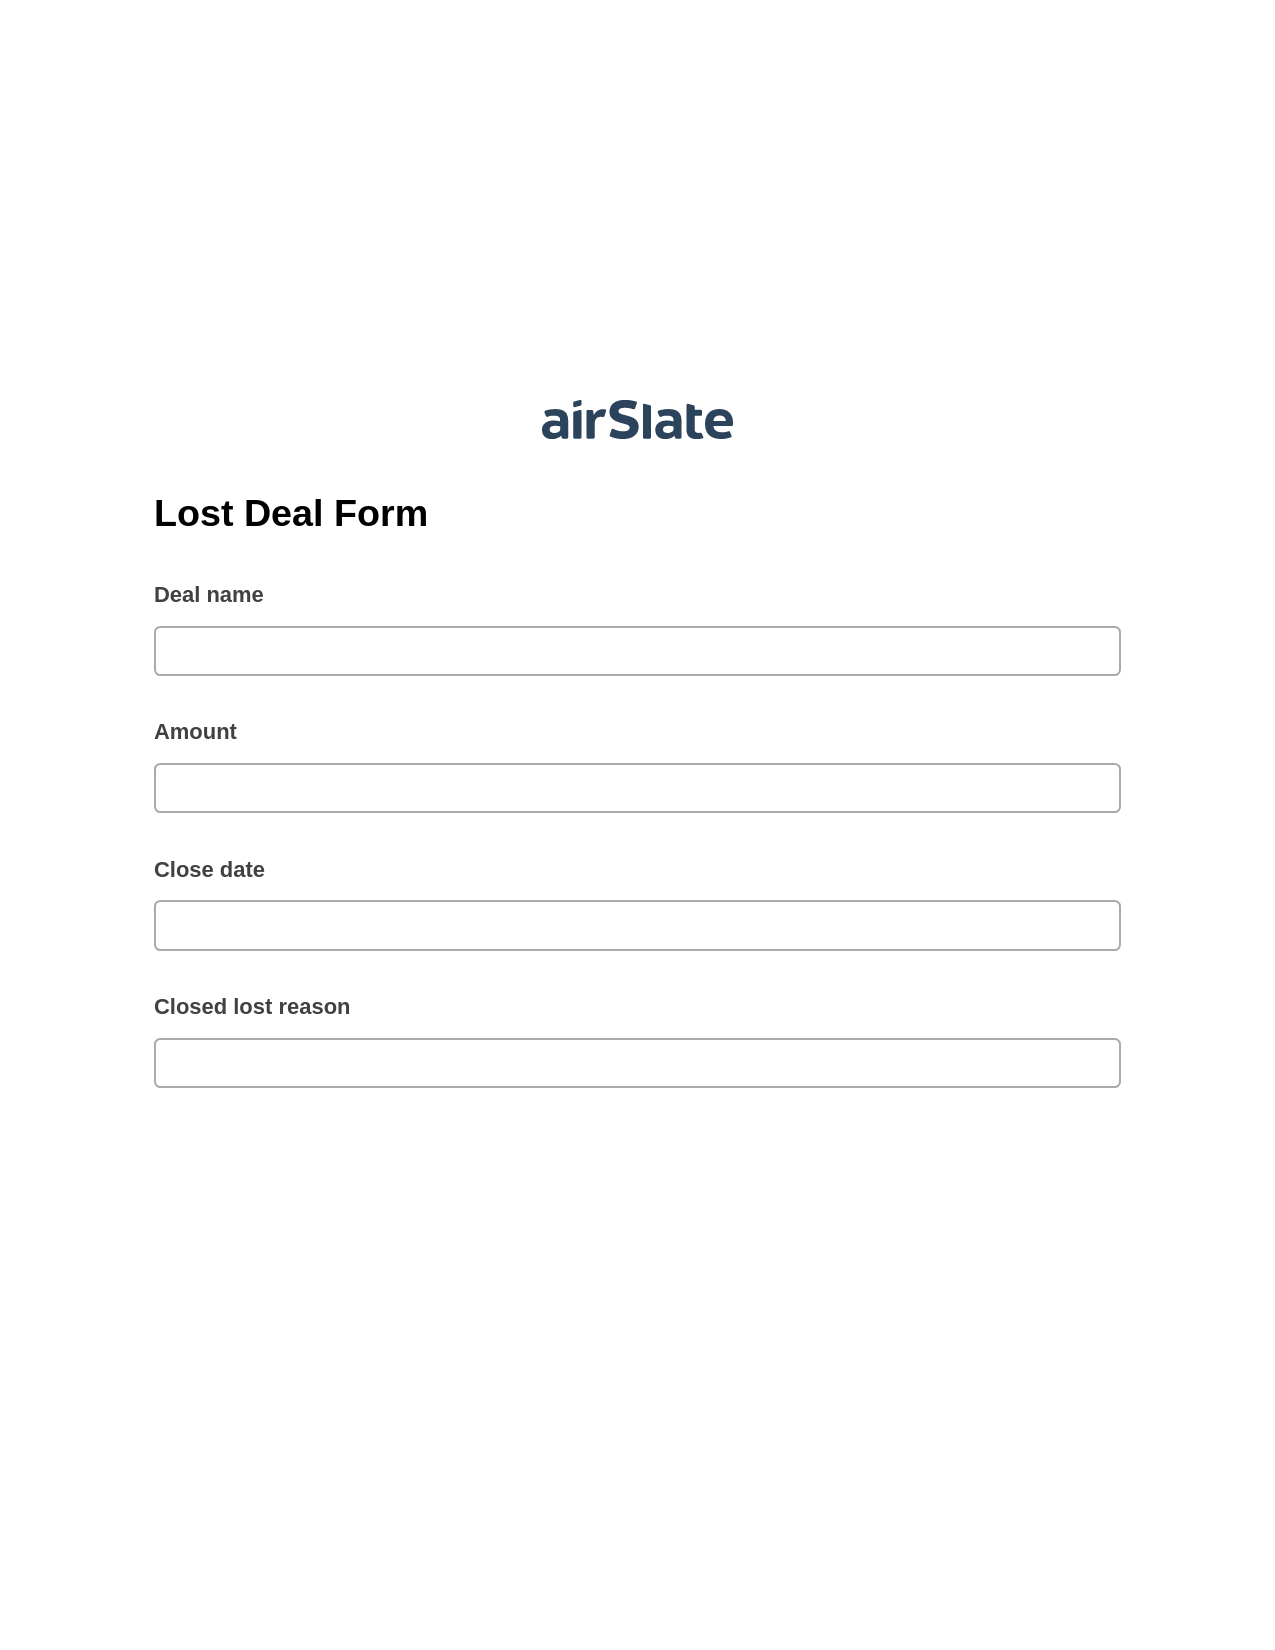 Lost Deal Form Prefill from NetSuite records, Update Salesforce Records Bot, Archive to SharePoint Folder Bot